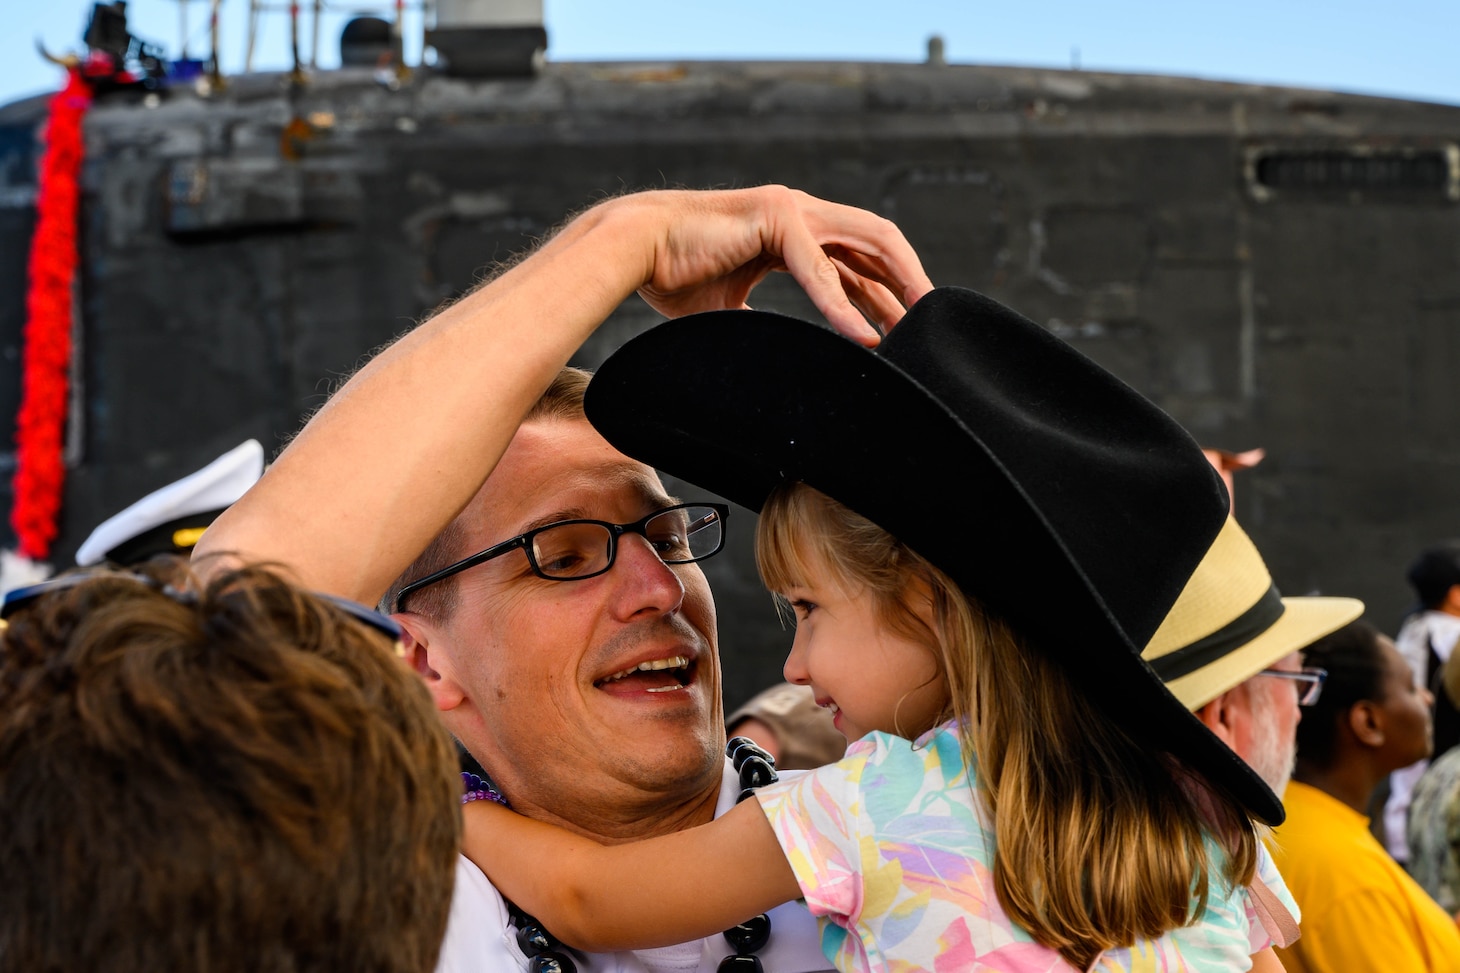 Cmdr. Mike Dolbec, from Manchester, New Hampshire, commanding officer of the Virginia-class fast-attack submarine USS Texas (SSN 775), greets his family during Texas' homecoming. Texas performed a full spectrum of operations, including anti-submarine and anti-surface warfare, during the seven-month Indo-Pacific deployment. (U.S. Navy photo by Mass Communication Specialist 1st Class Michael B. Zingaro/Released)